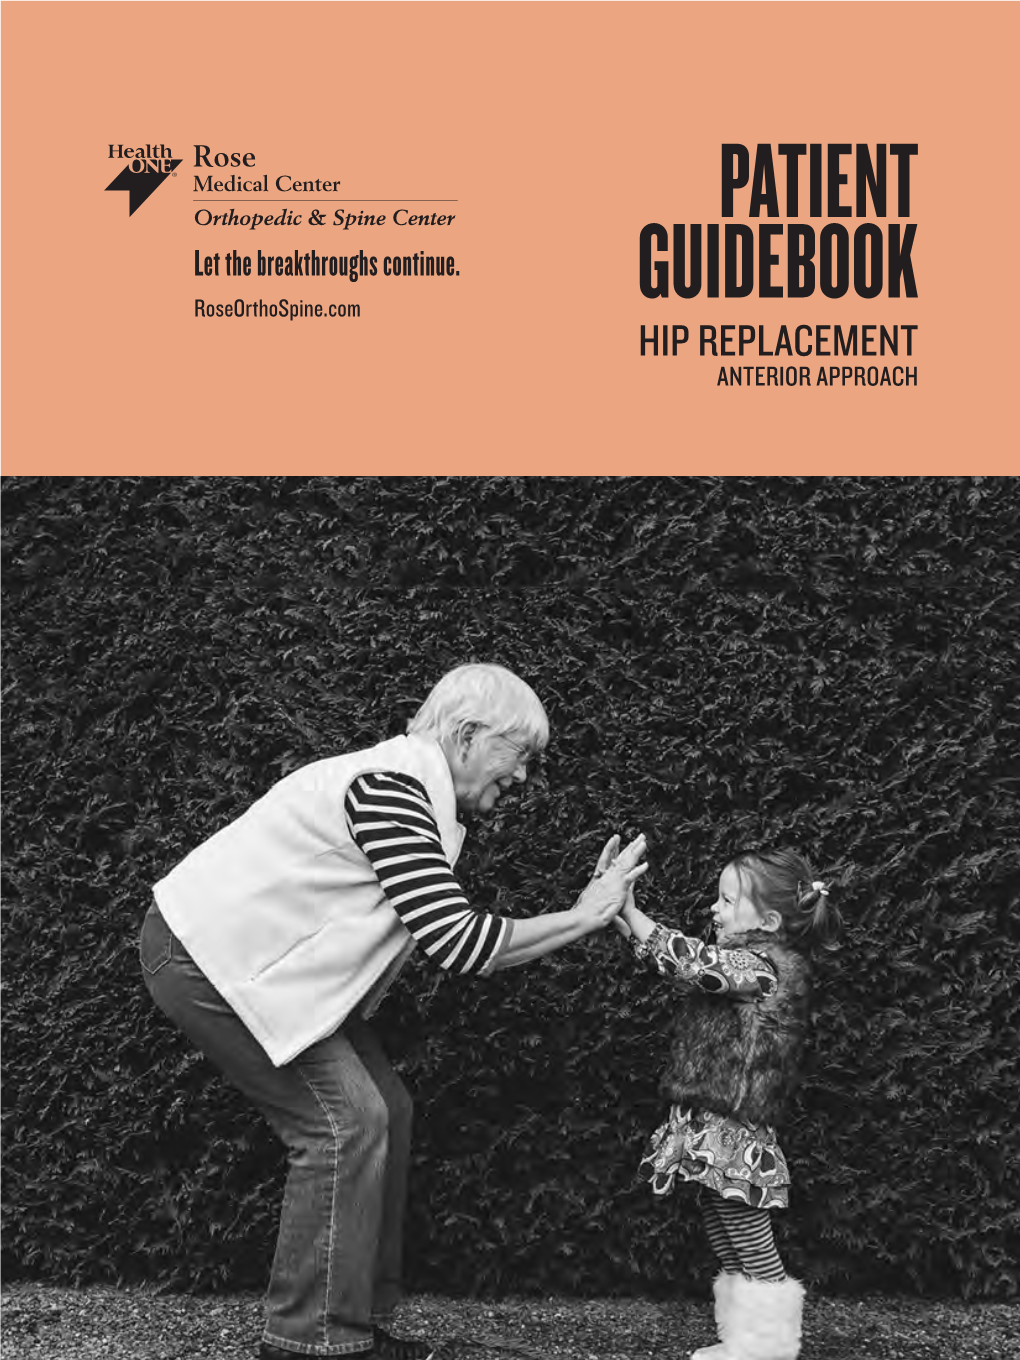 Patient Guidebook Hip Replacement Anterior Approach